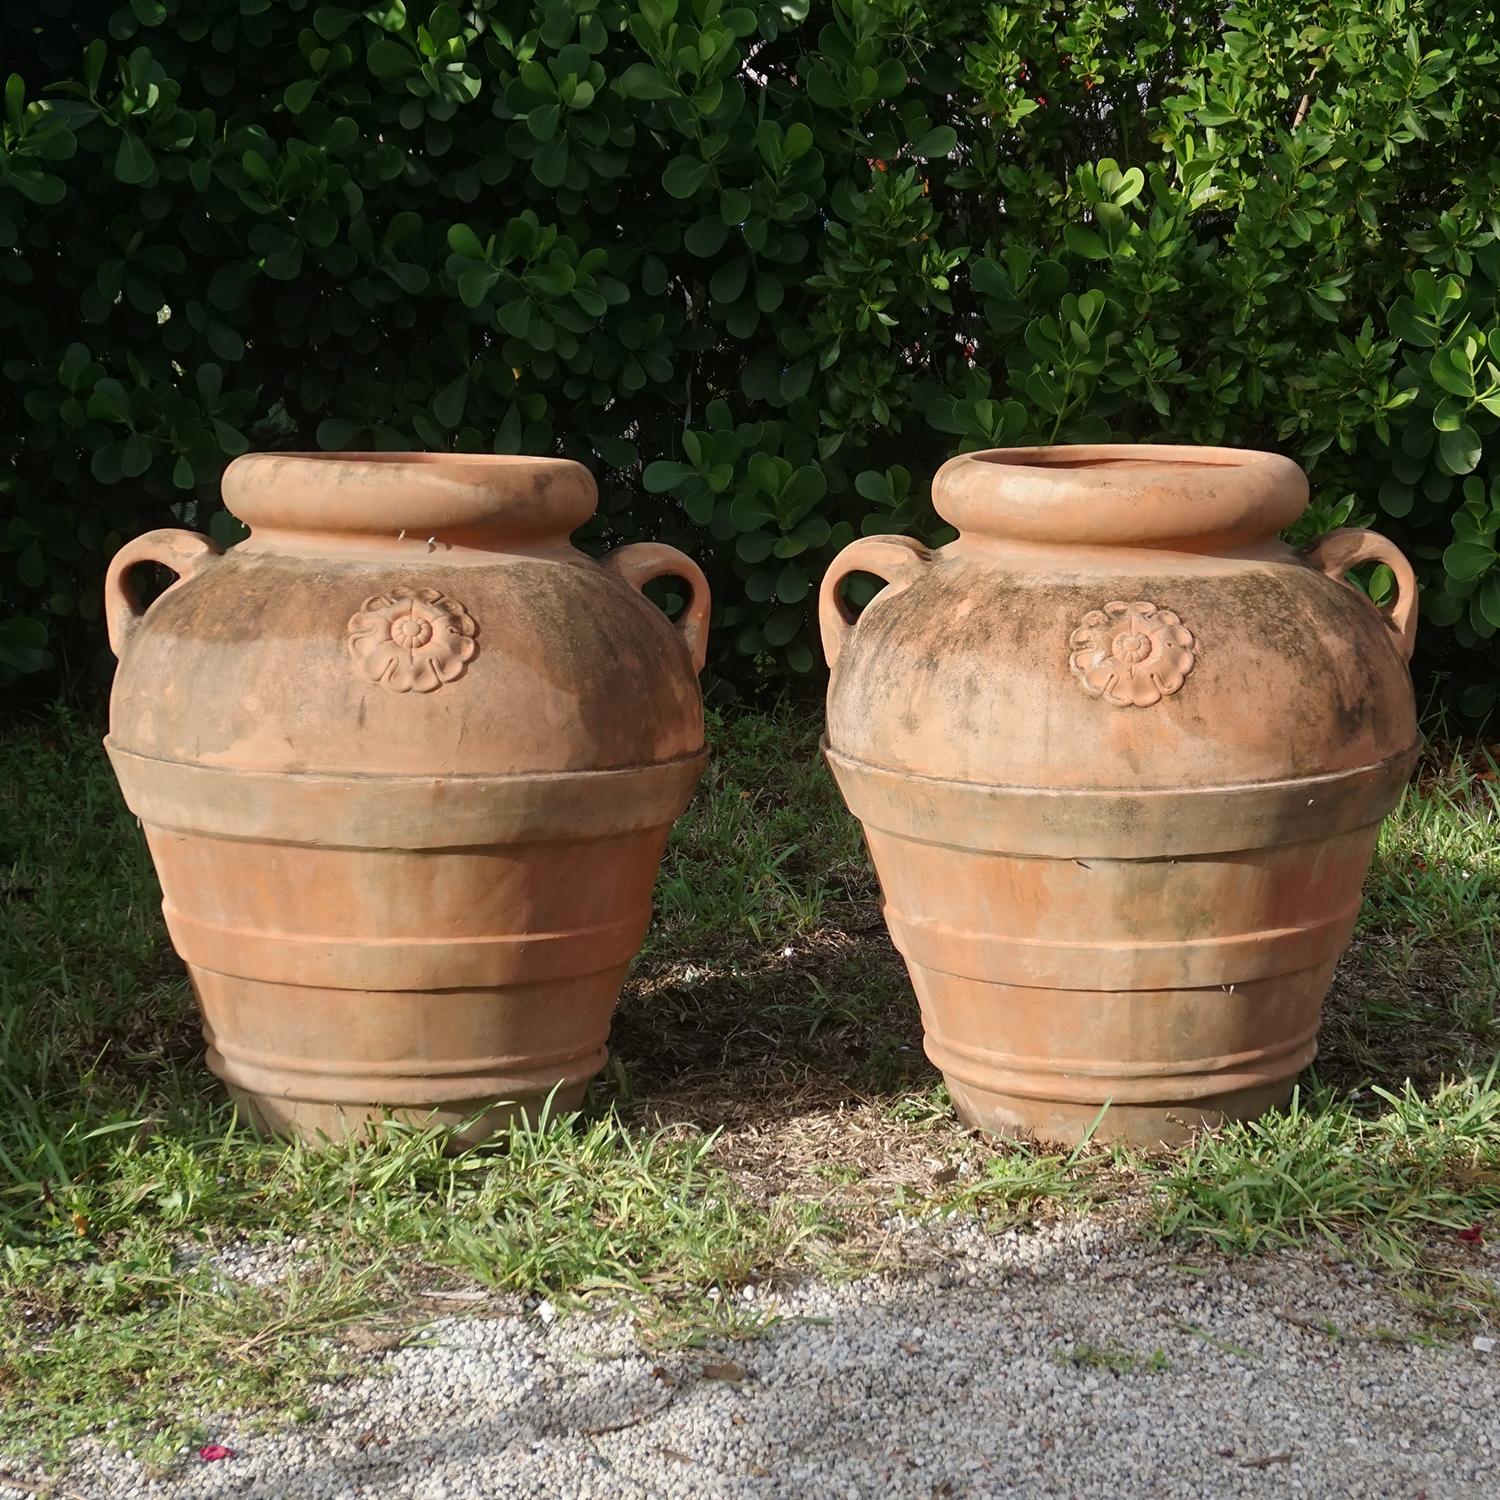 A pair of rustic vintage Tuscan garden urns topped with a heavy rolled rim, decorated with rosettes and wide bands around the bodices of the planters, in good condition. These urns are made of terra cotta clay. Wear consistent with age and use.